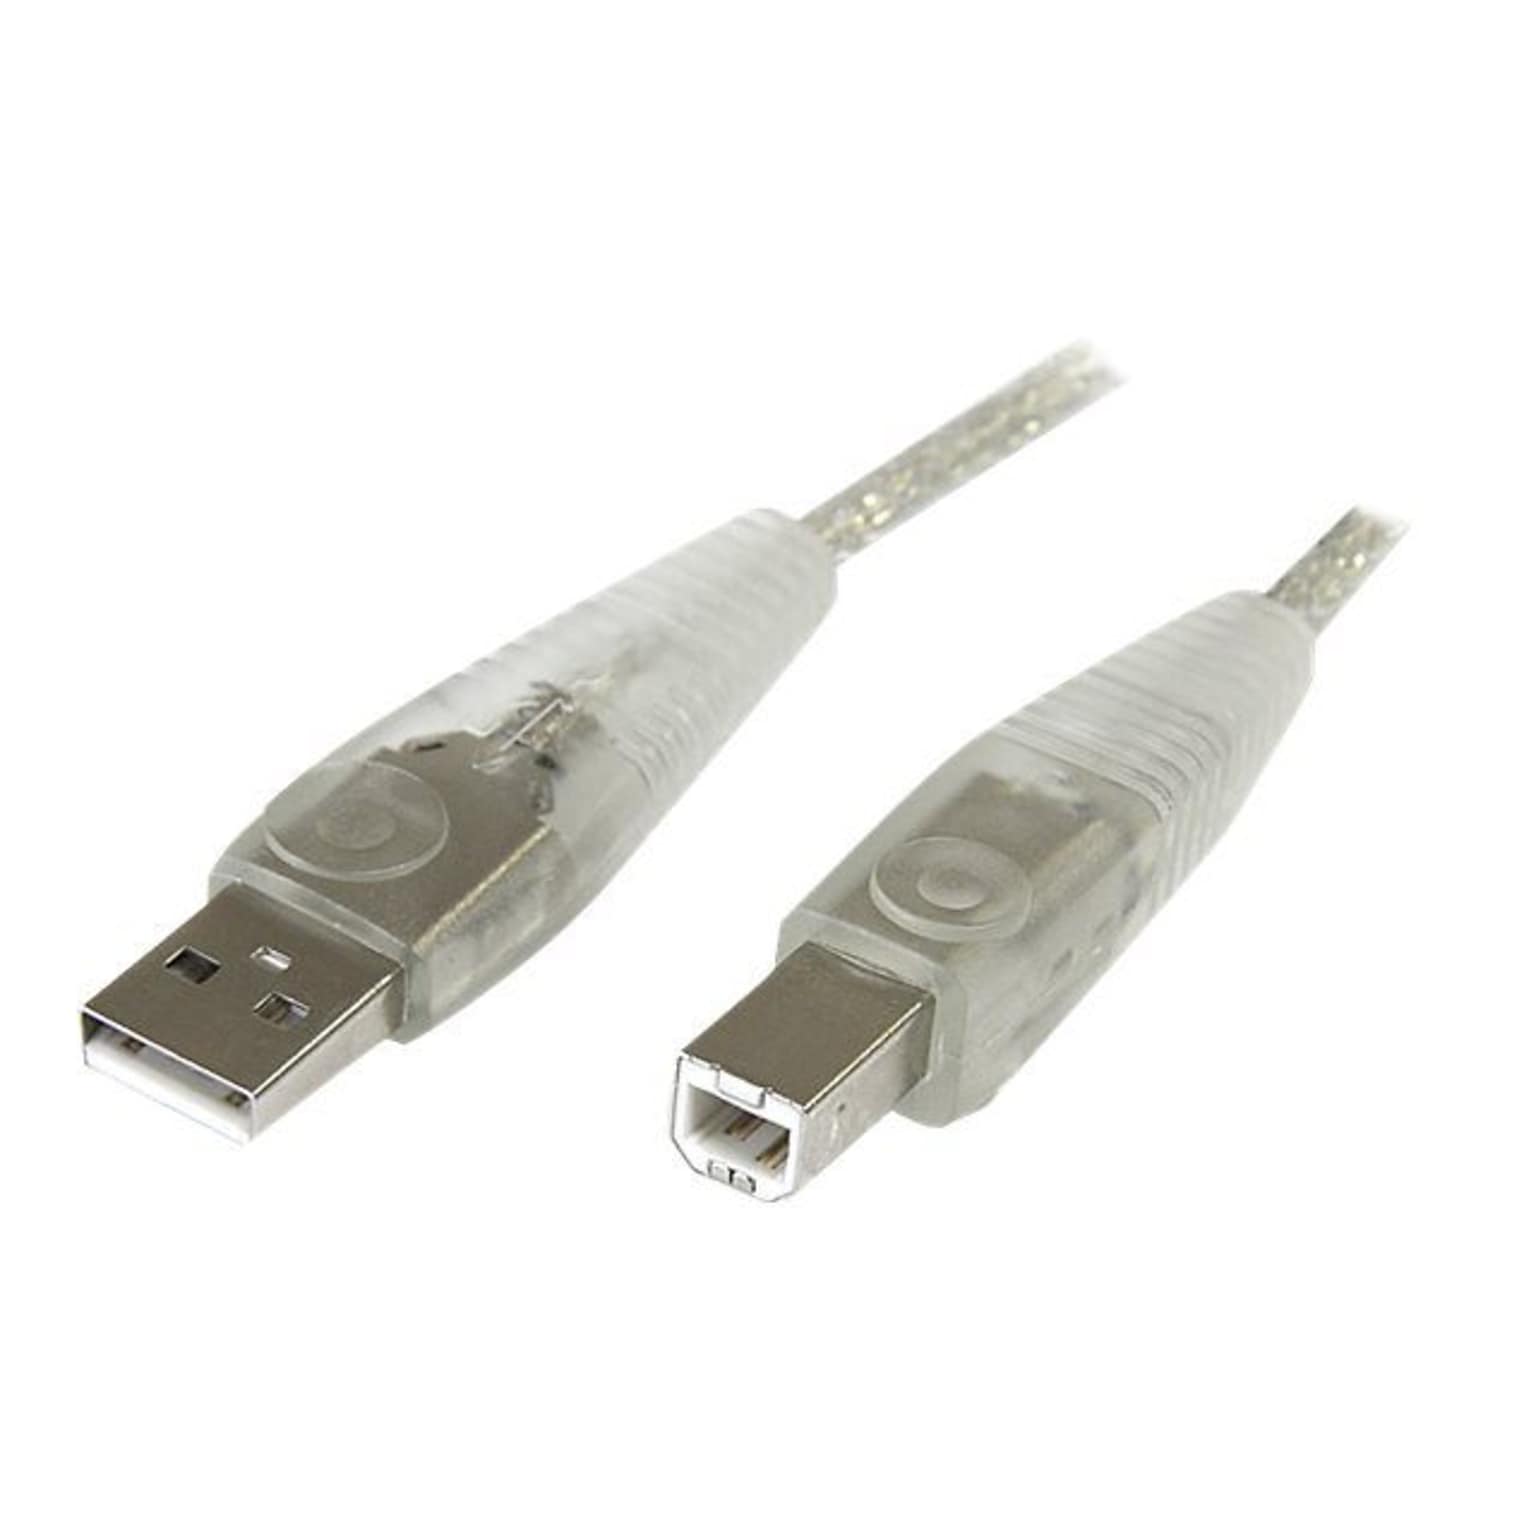 Startech® 15 A To B USB 2.0 Cable, Transparent